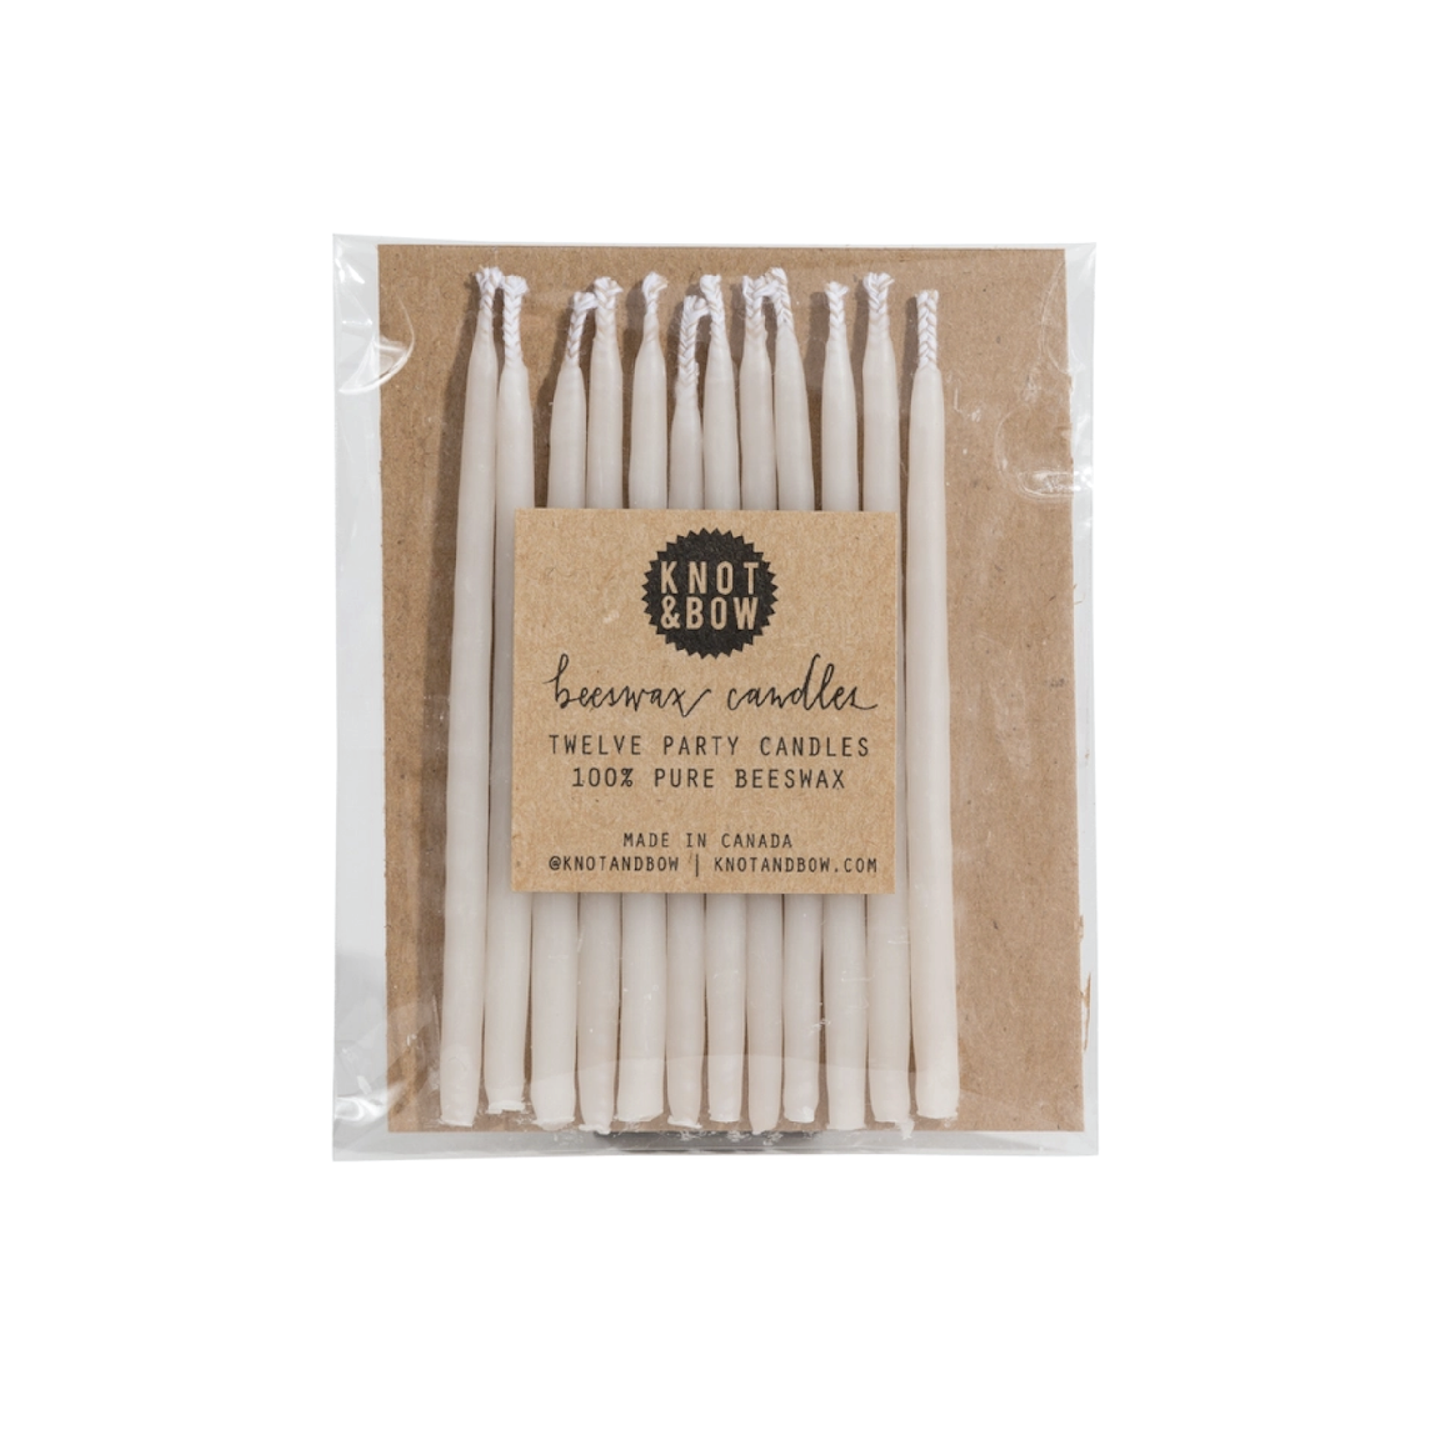 SALE - Ivory Beeswax Birthday Candles